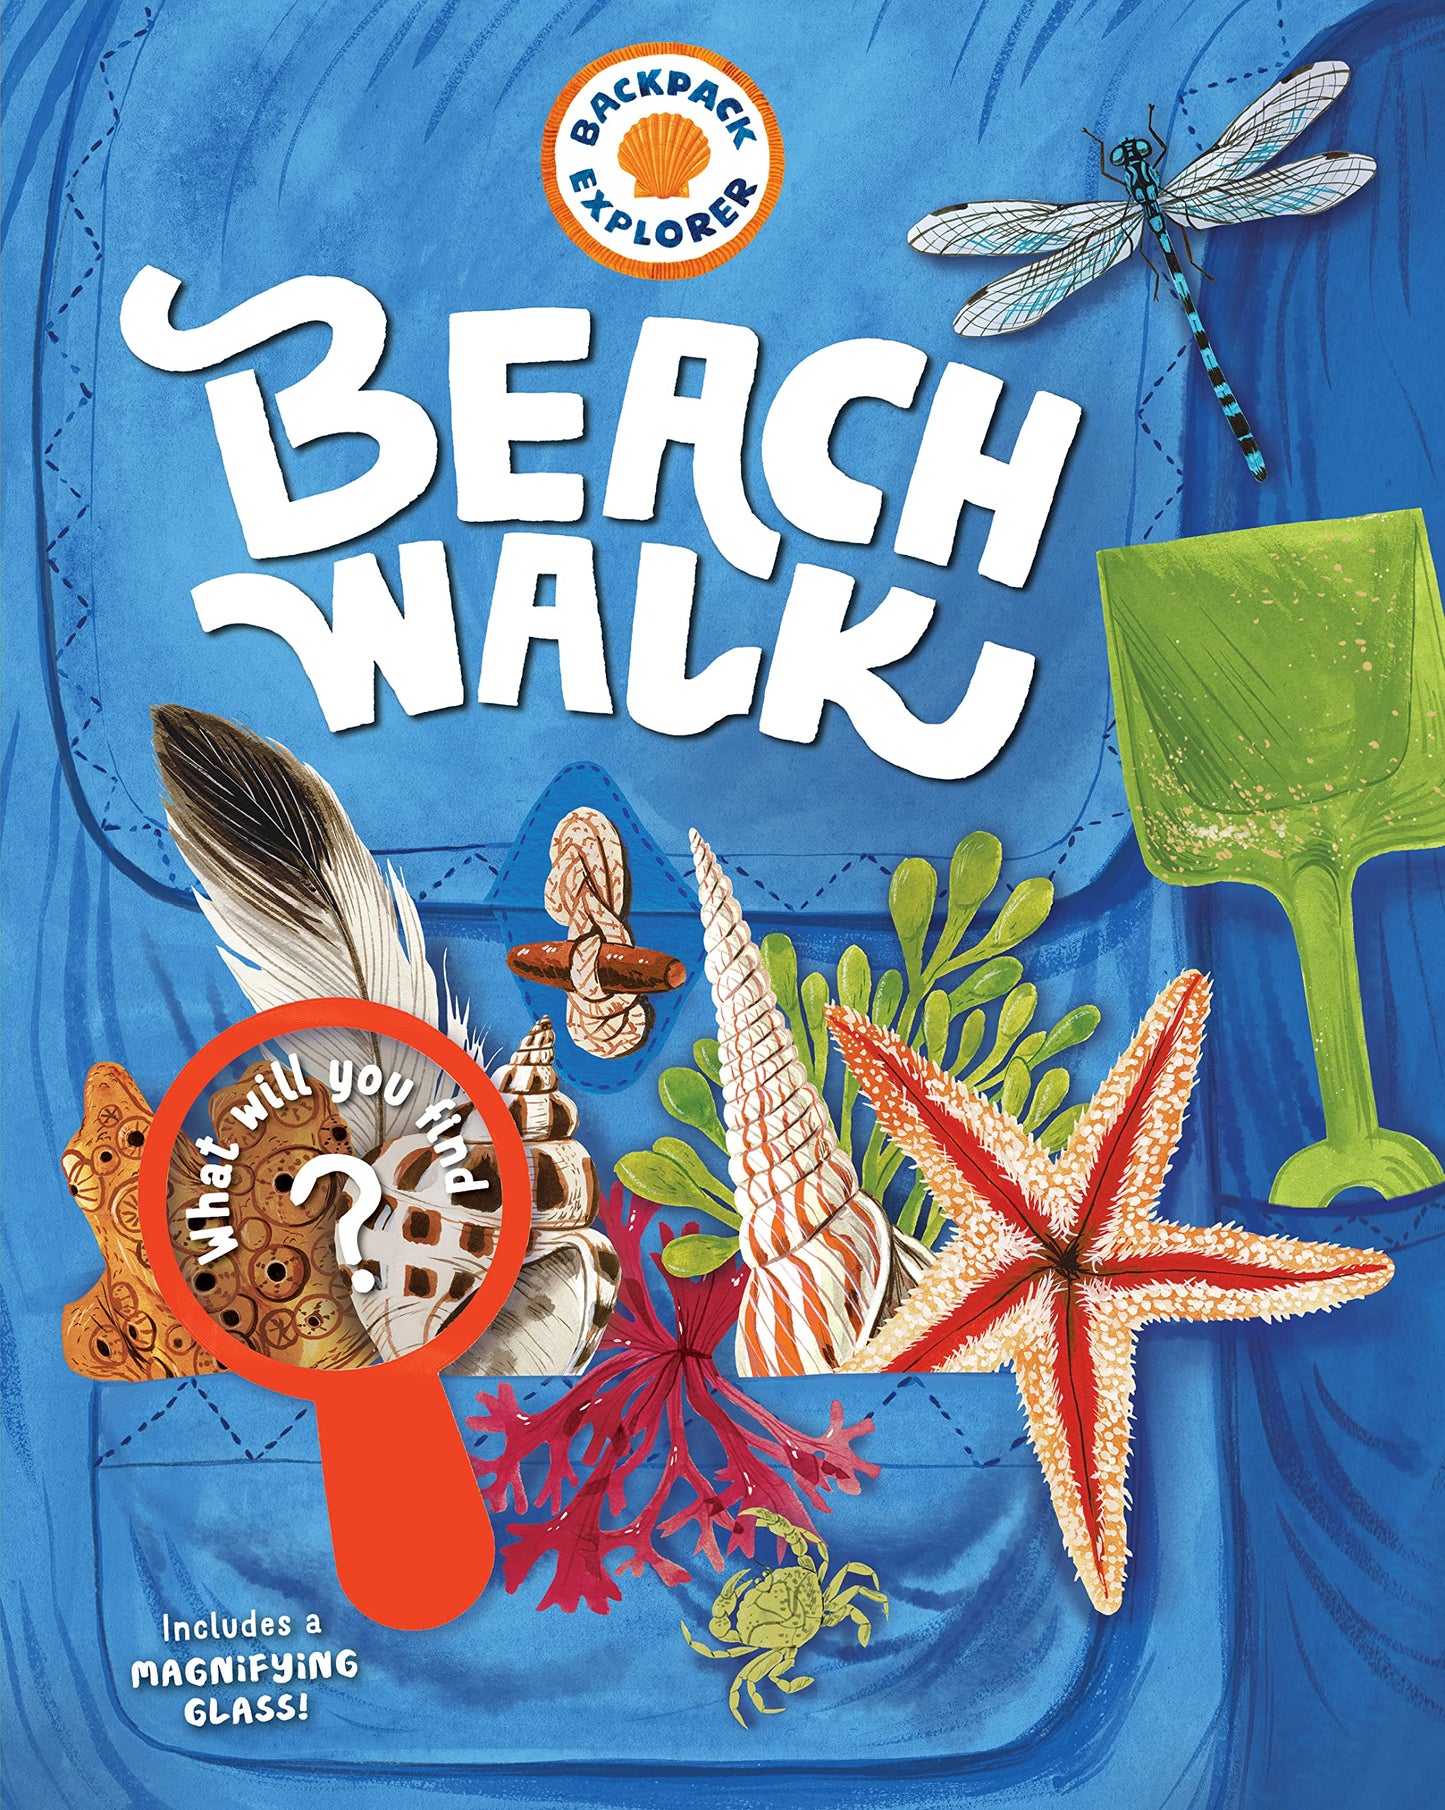 front cover has illustration of a blue backpack with sea shells sticking out of the pockets, green shovel, and title in white